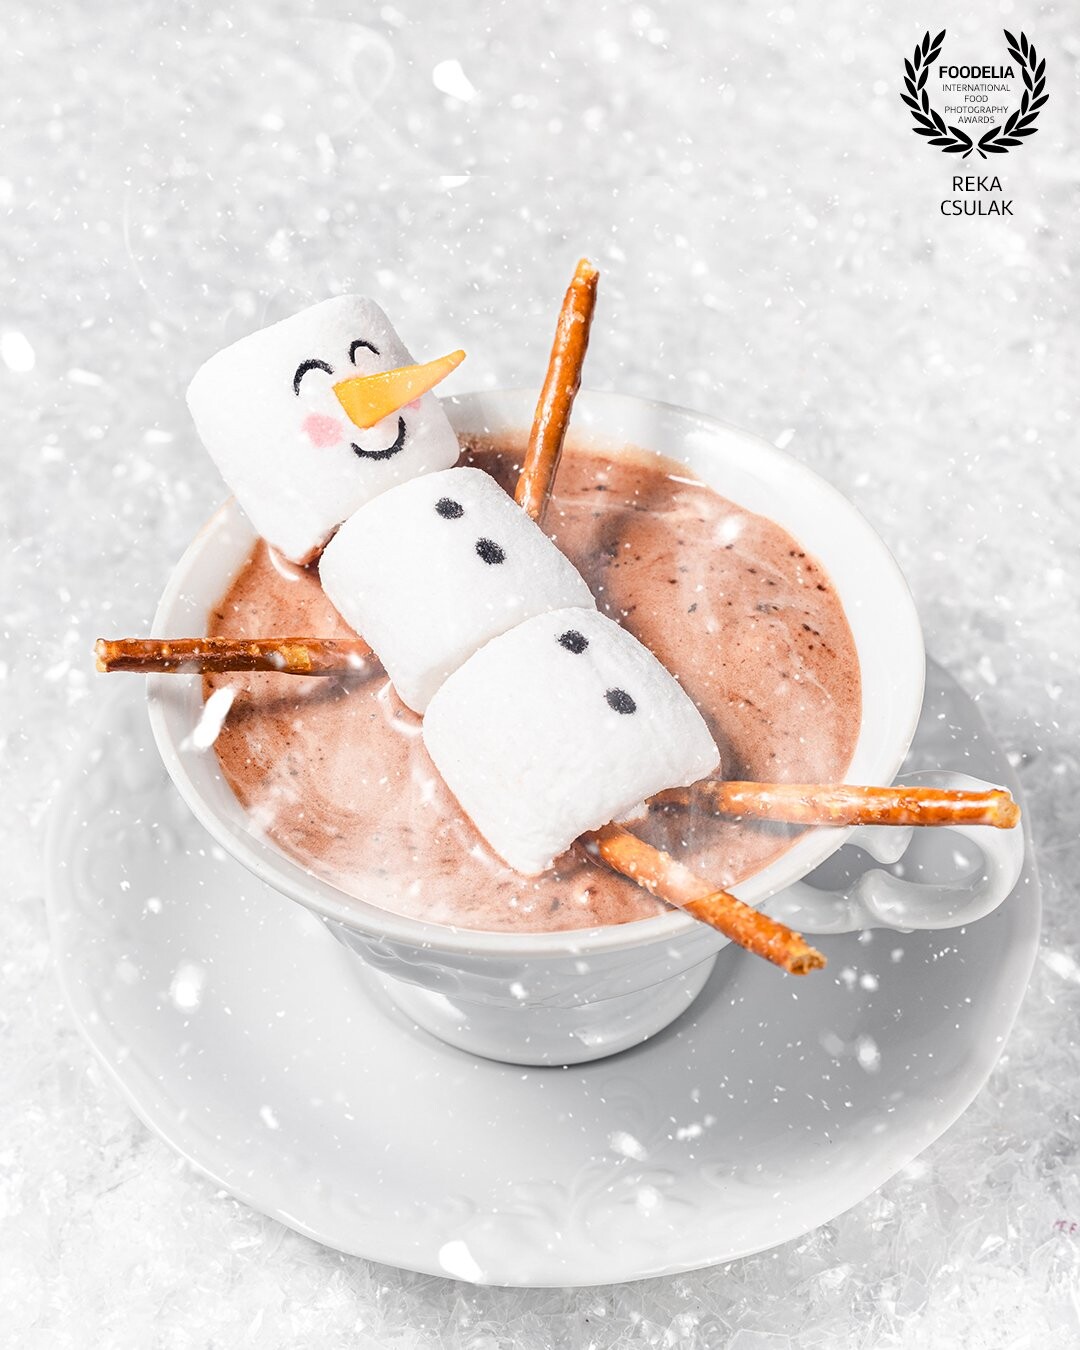 Lean back and enjoy this cup of winter-themed hot chocolate. Look how the marshmellow snowman enjoy it… after the first sip, a wide smile will be guaranteed on your face too!